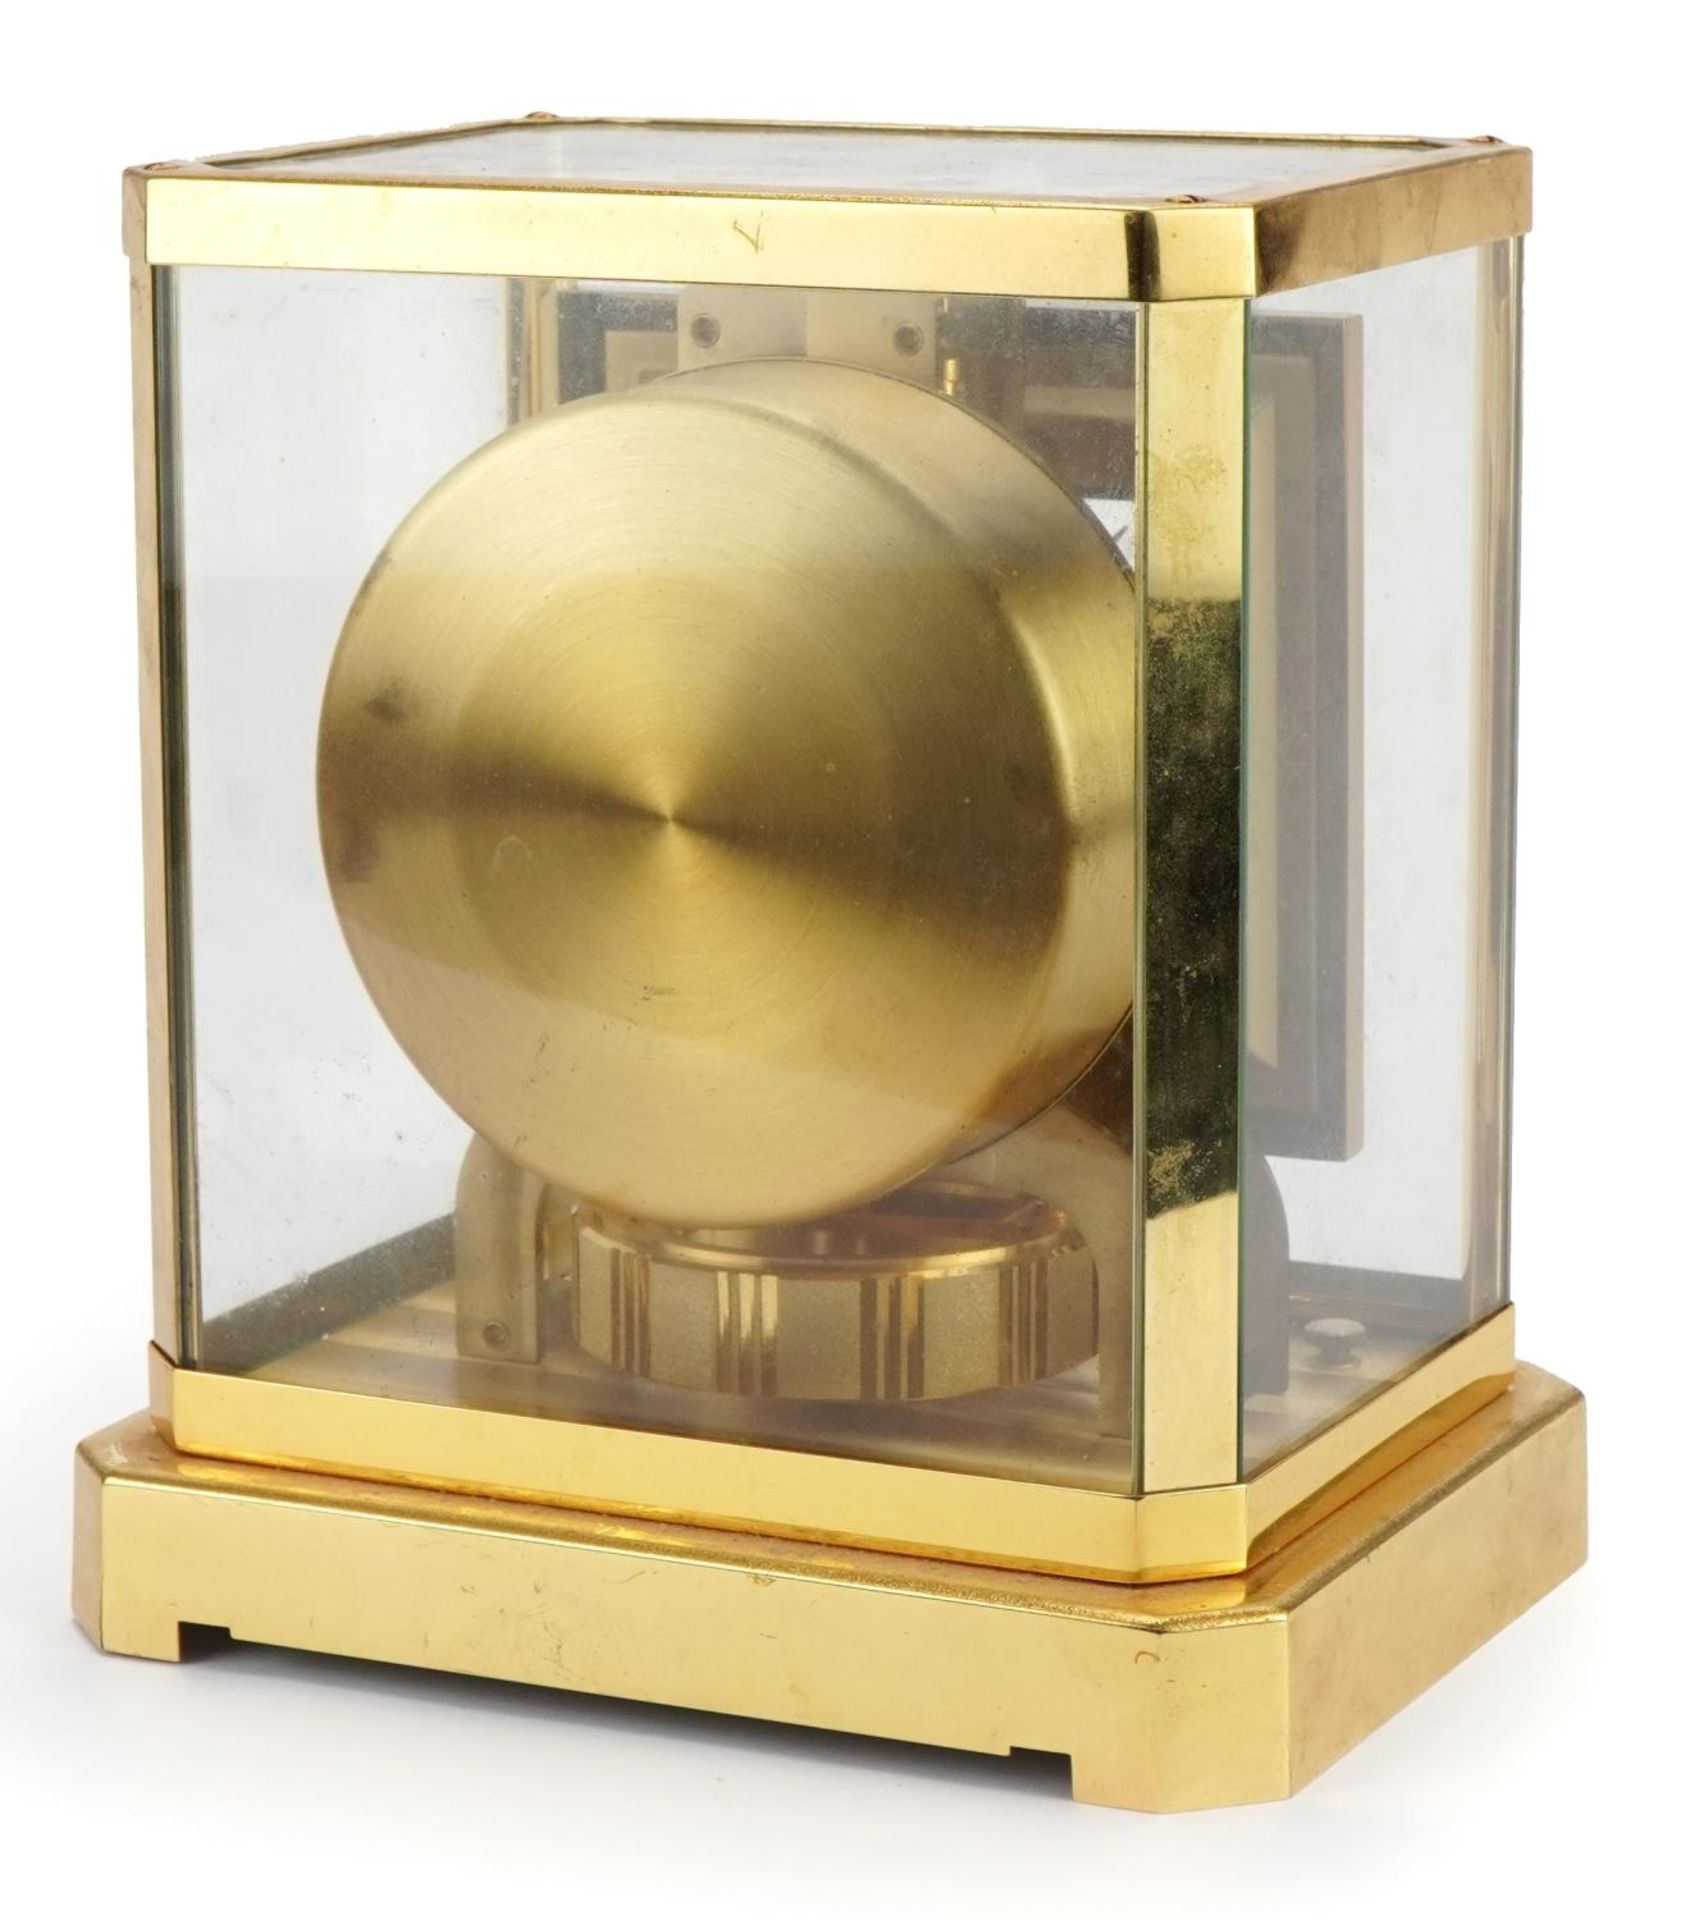 Jaeger LeCoultre brass cased Atmos clock, serial number 295987, 23.5cm high - Image 3 of 3